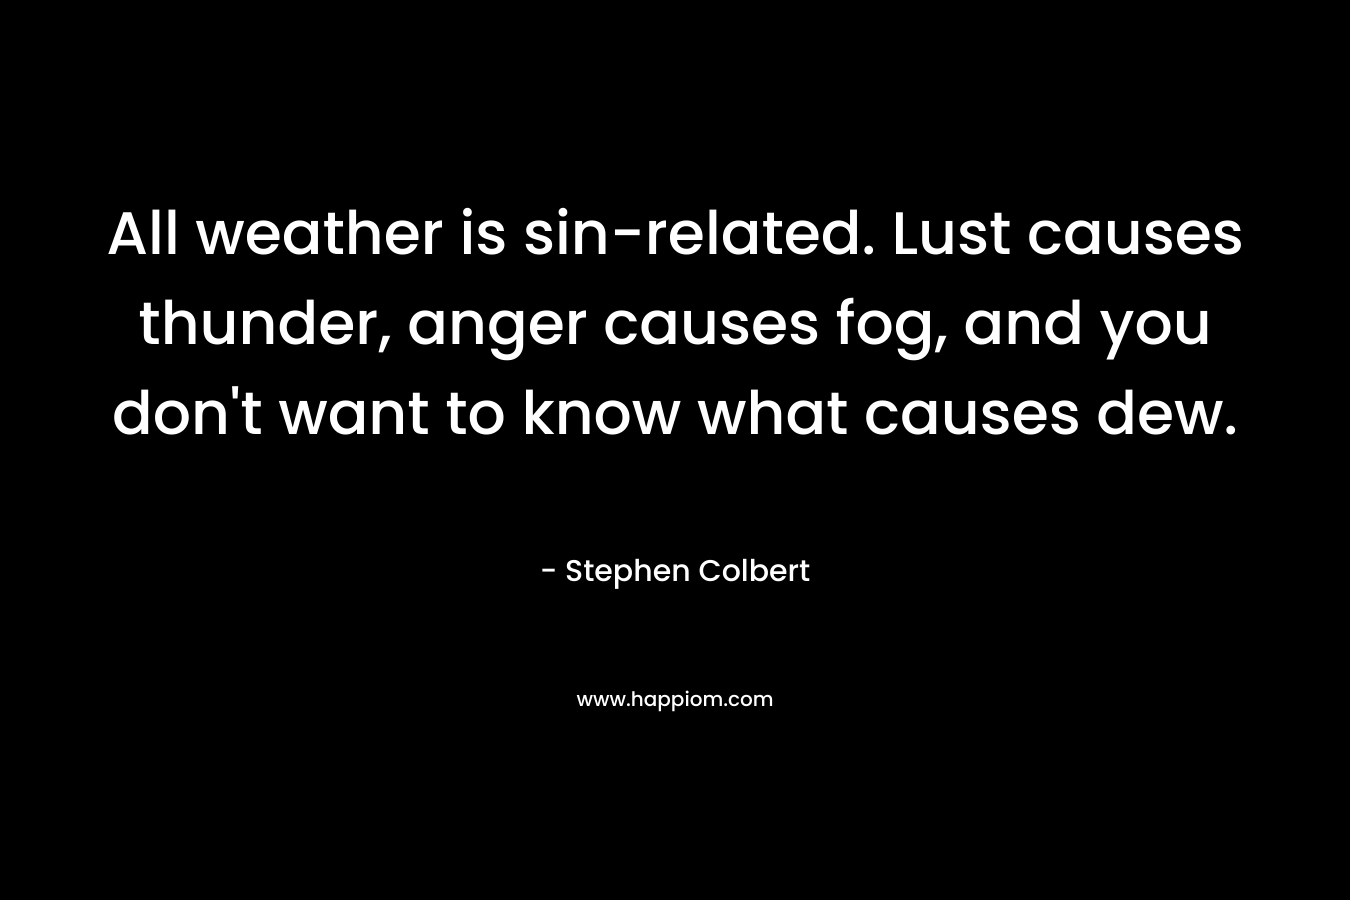 All weather is sin-related. Lust causes thunder, anger causes fog, and you don't want to know what causes dew.